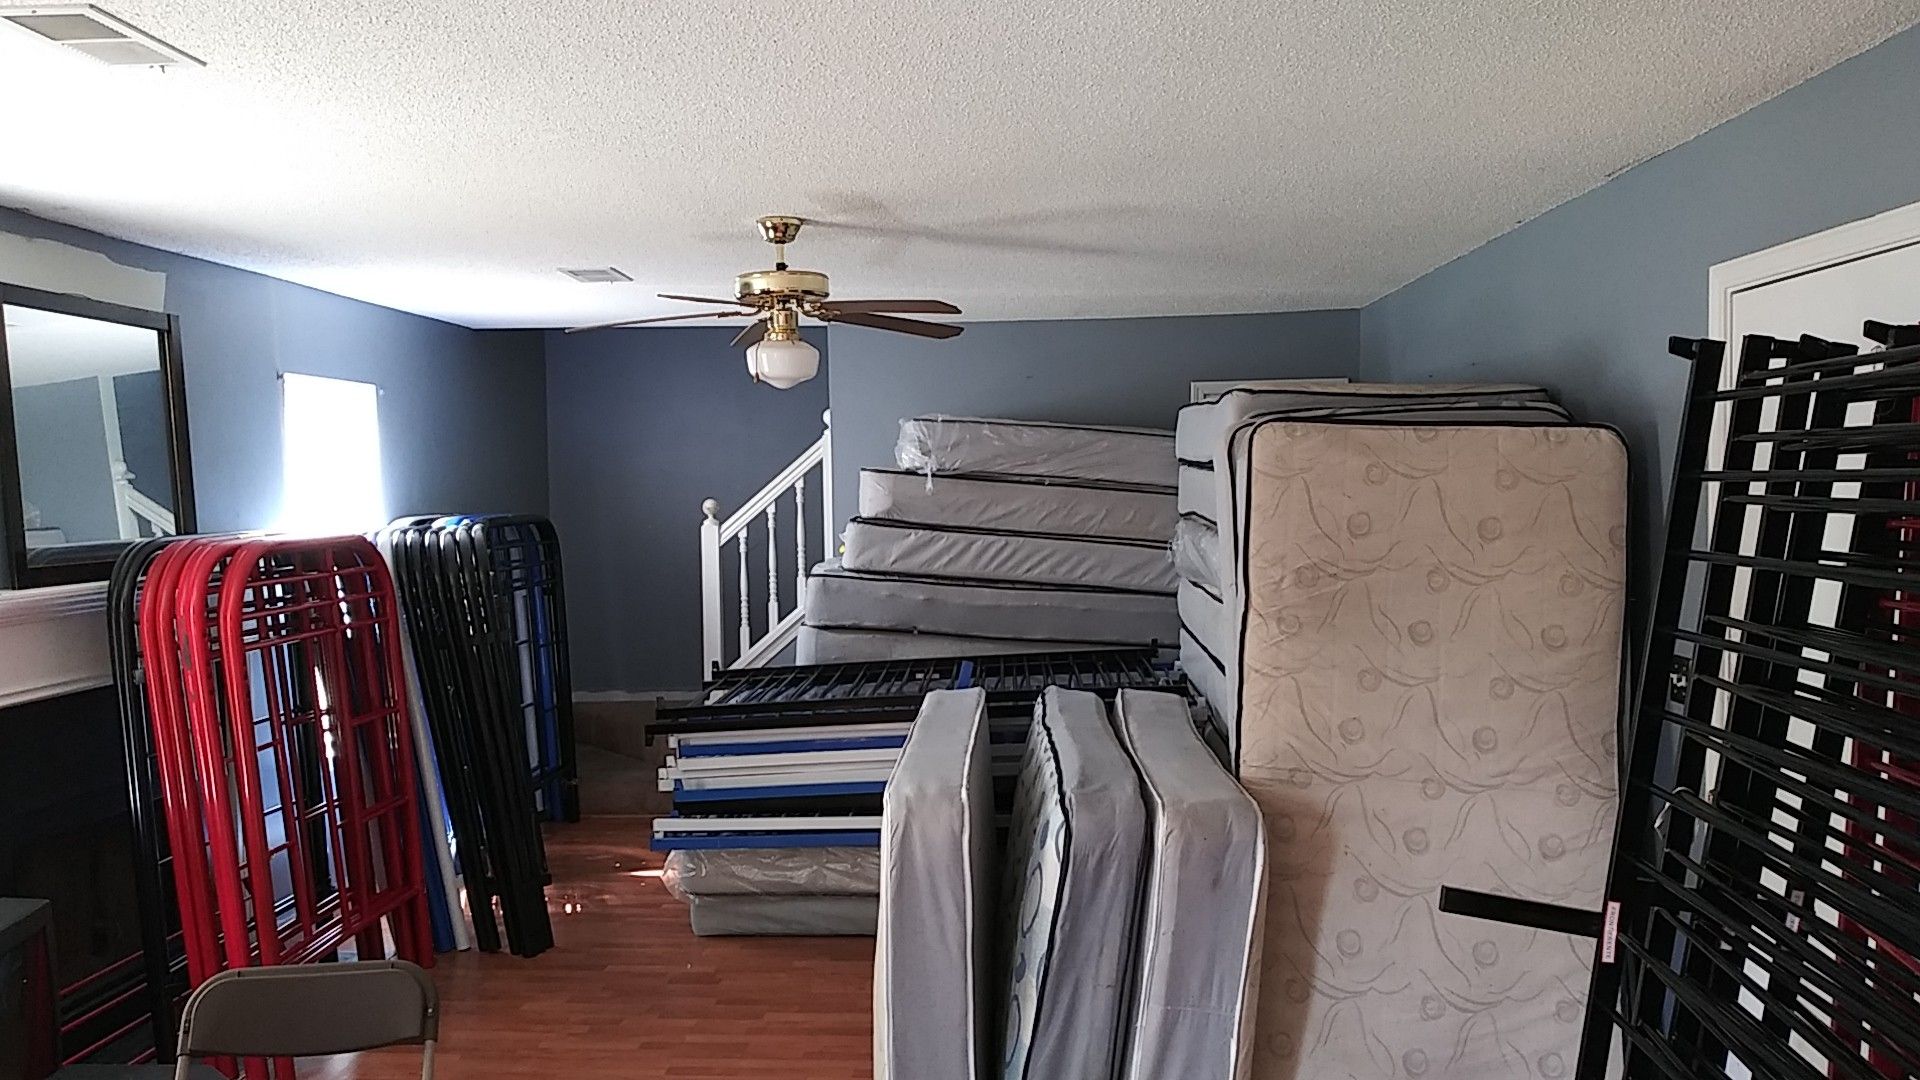 Bunk beds in really good condition 13 bunk beds